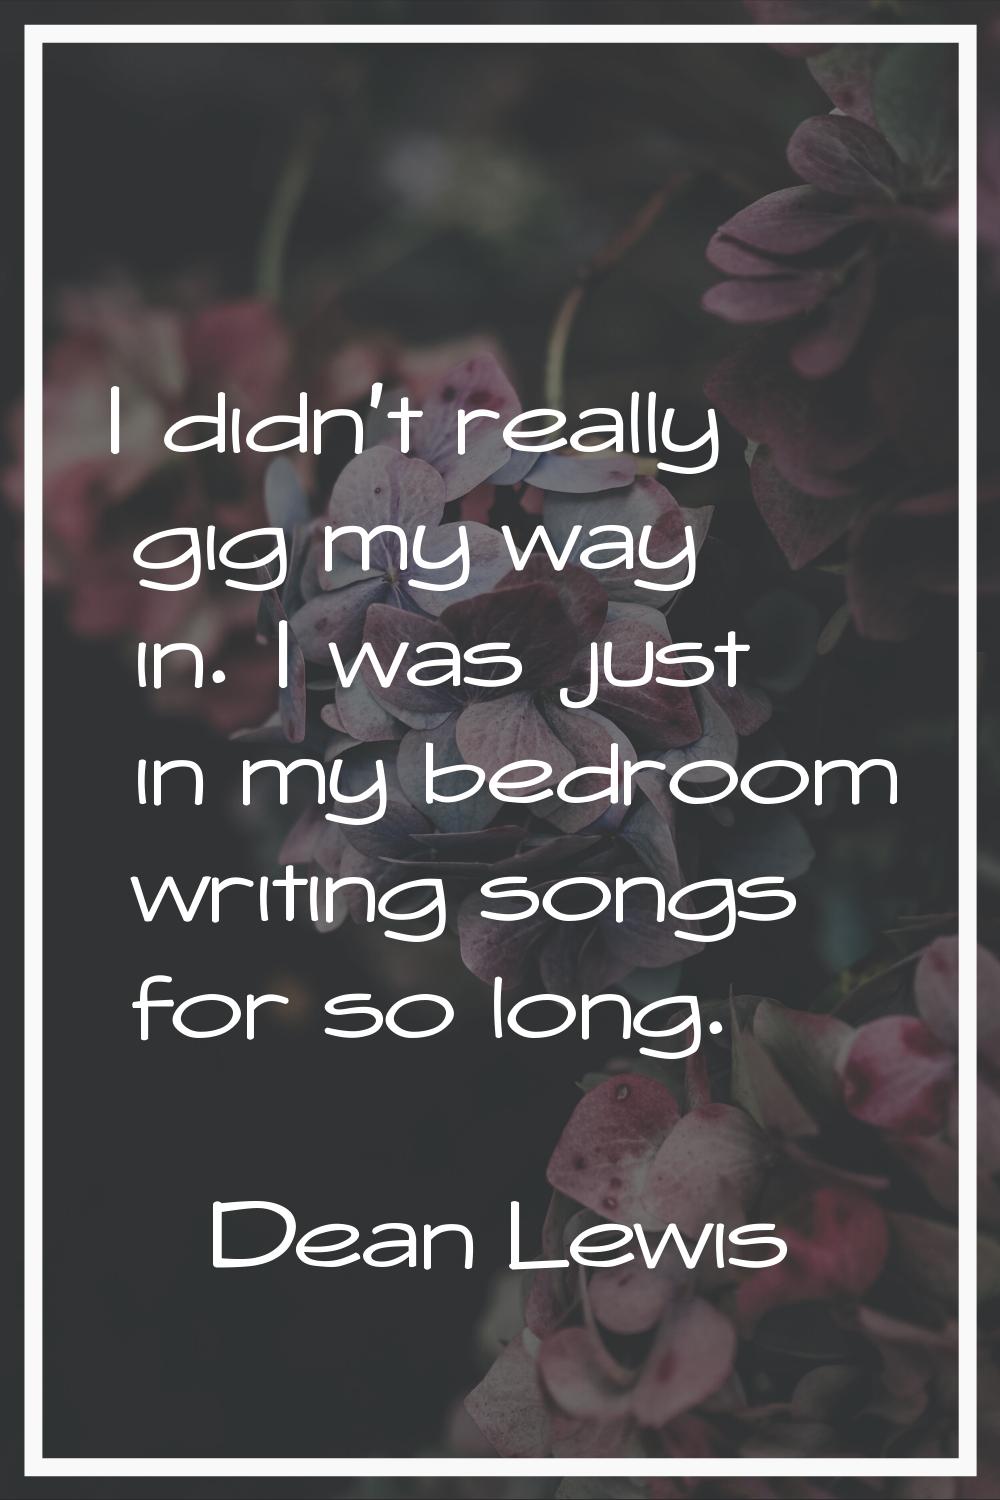 I didn't really gig my way in. I was just in my bedroom writing songs for so long.